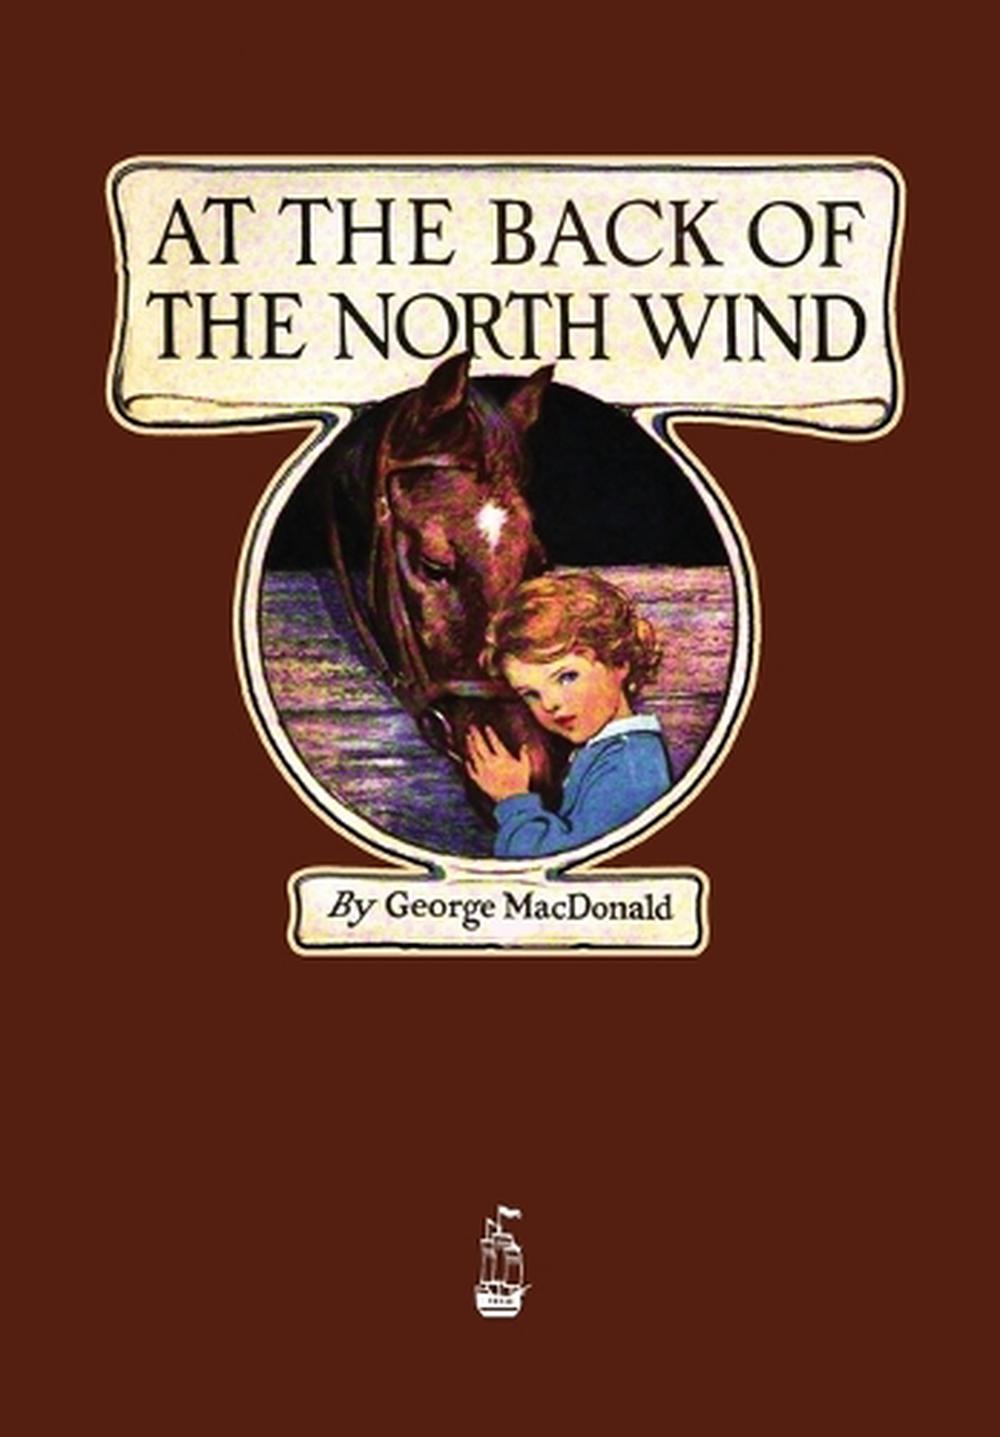 at the back of the north wind by george macdonald